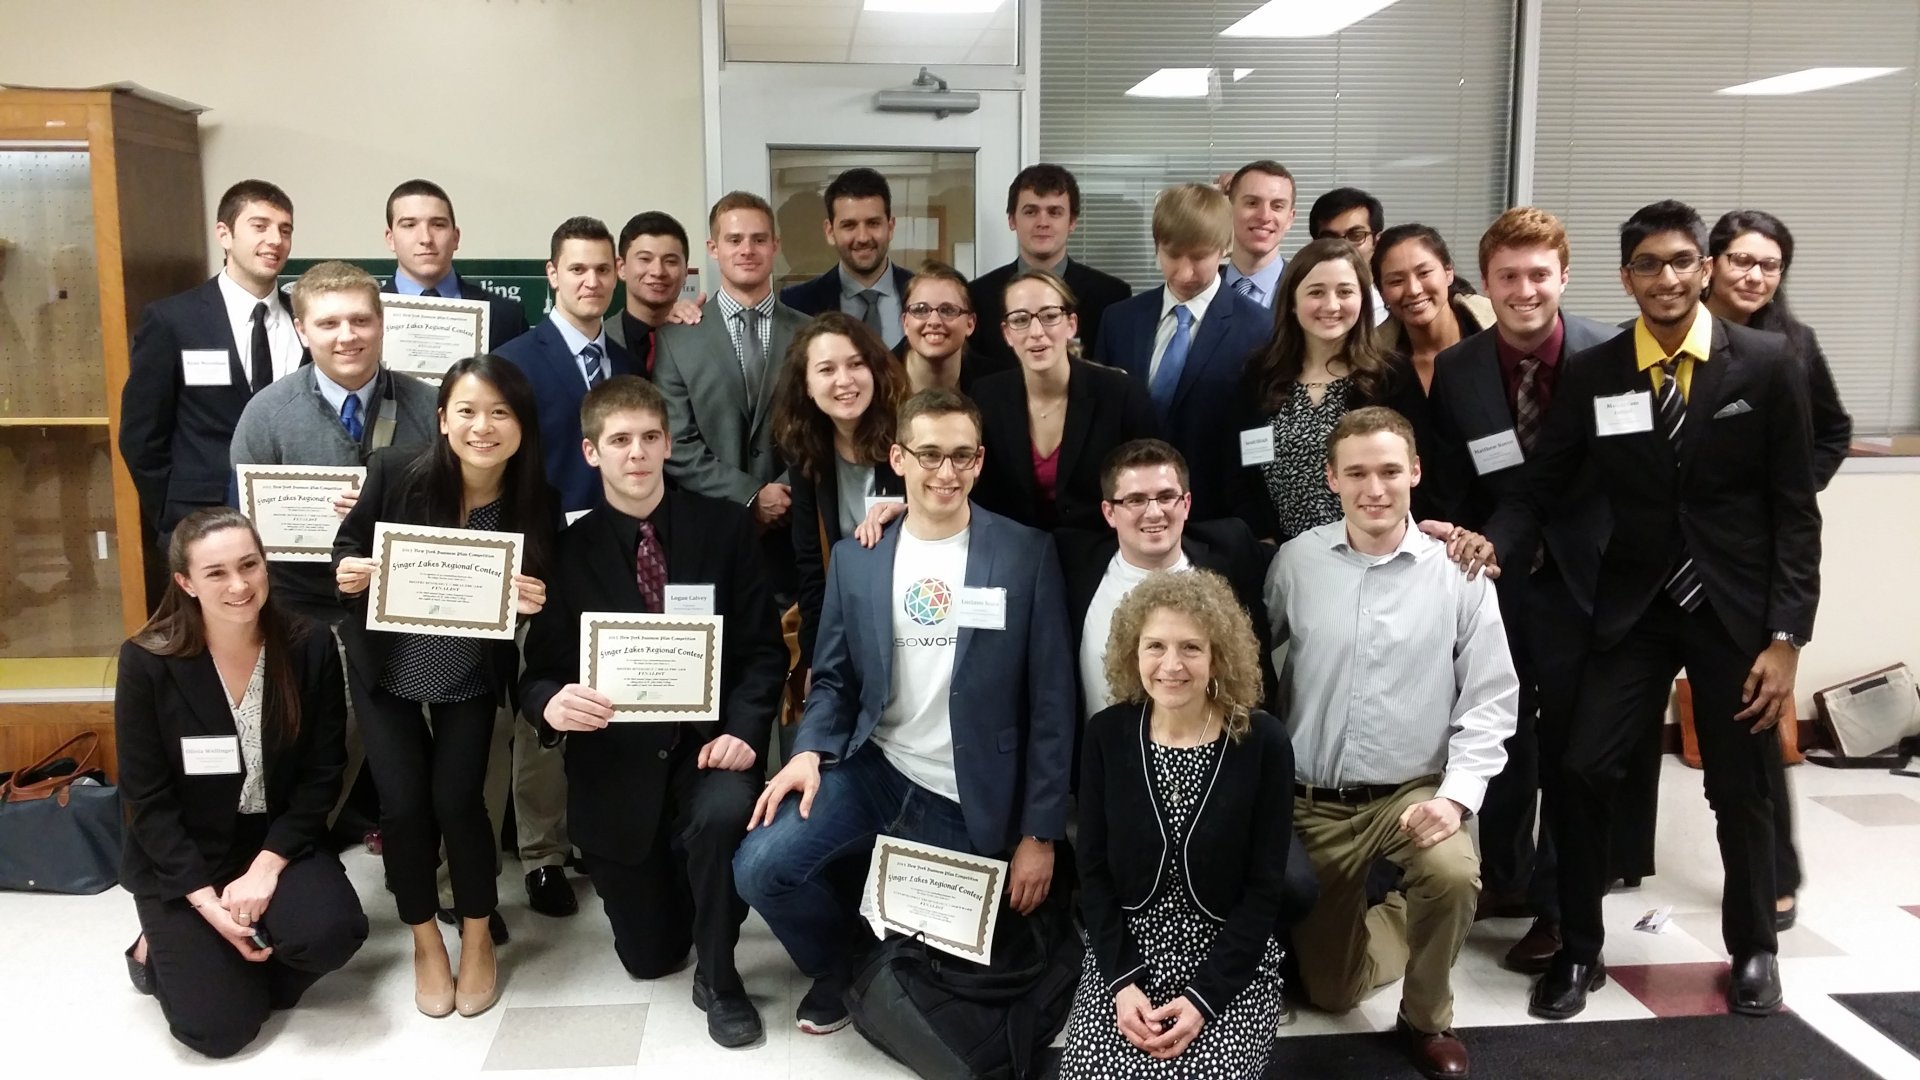 April 2015: NYBPC Regionals, hosted by Saint John Fisher College